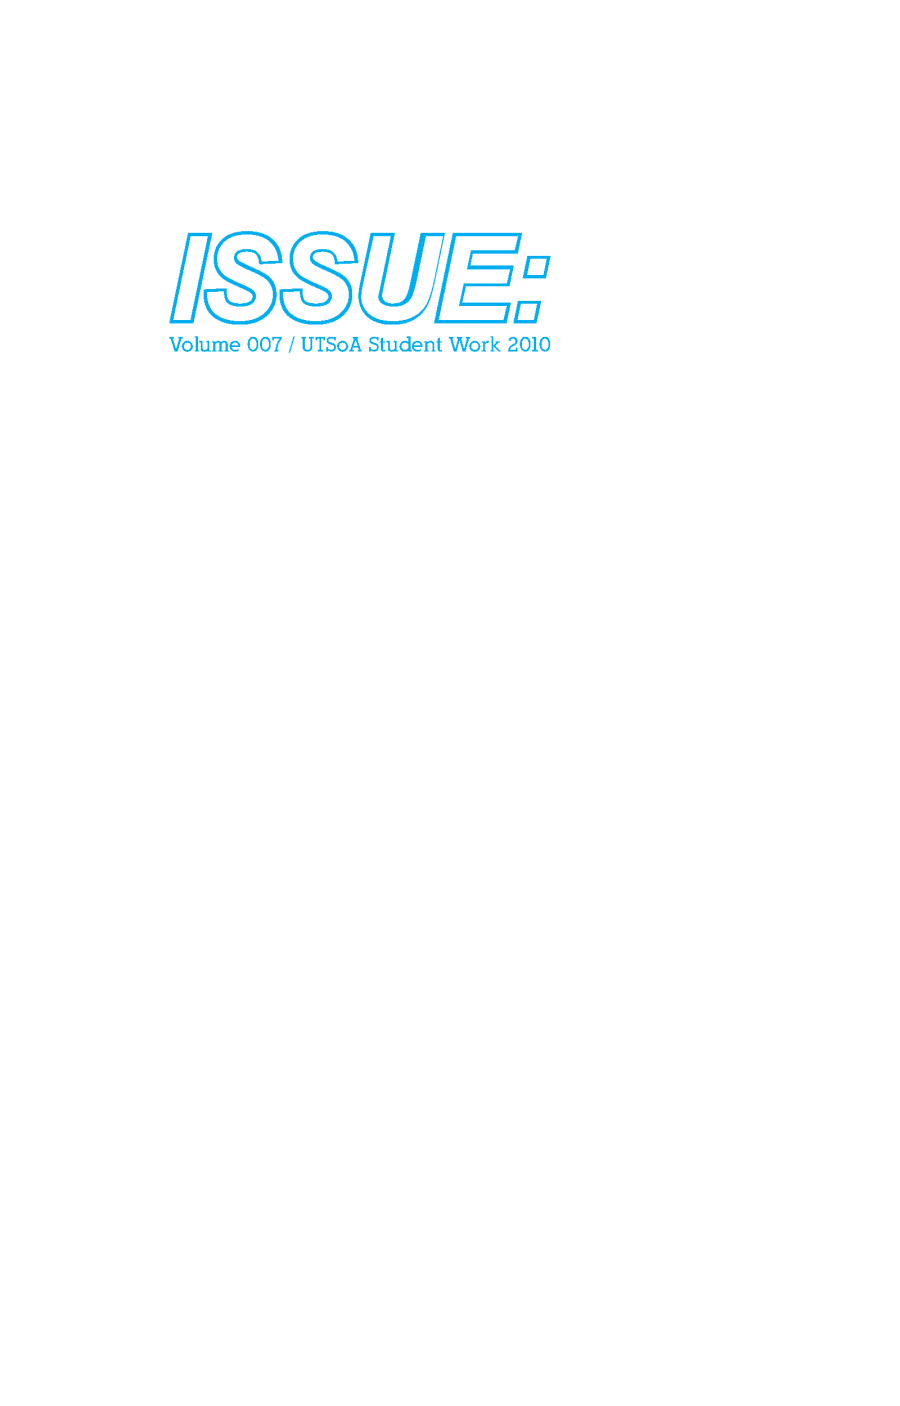 ISSUE: 007